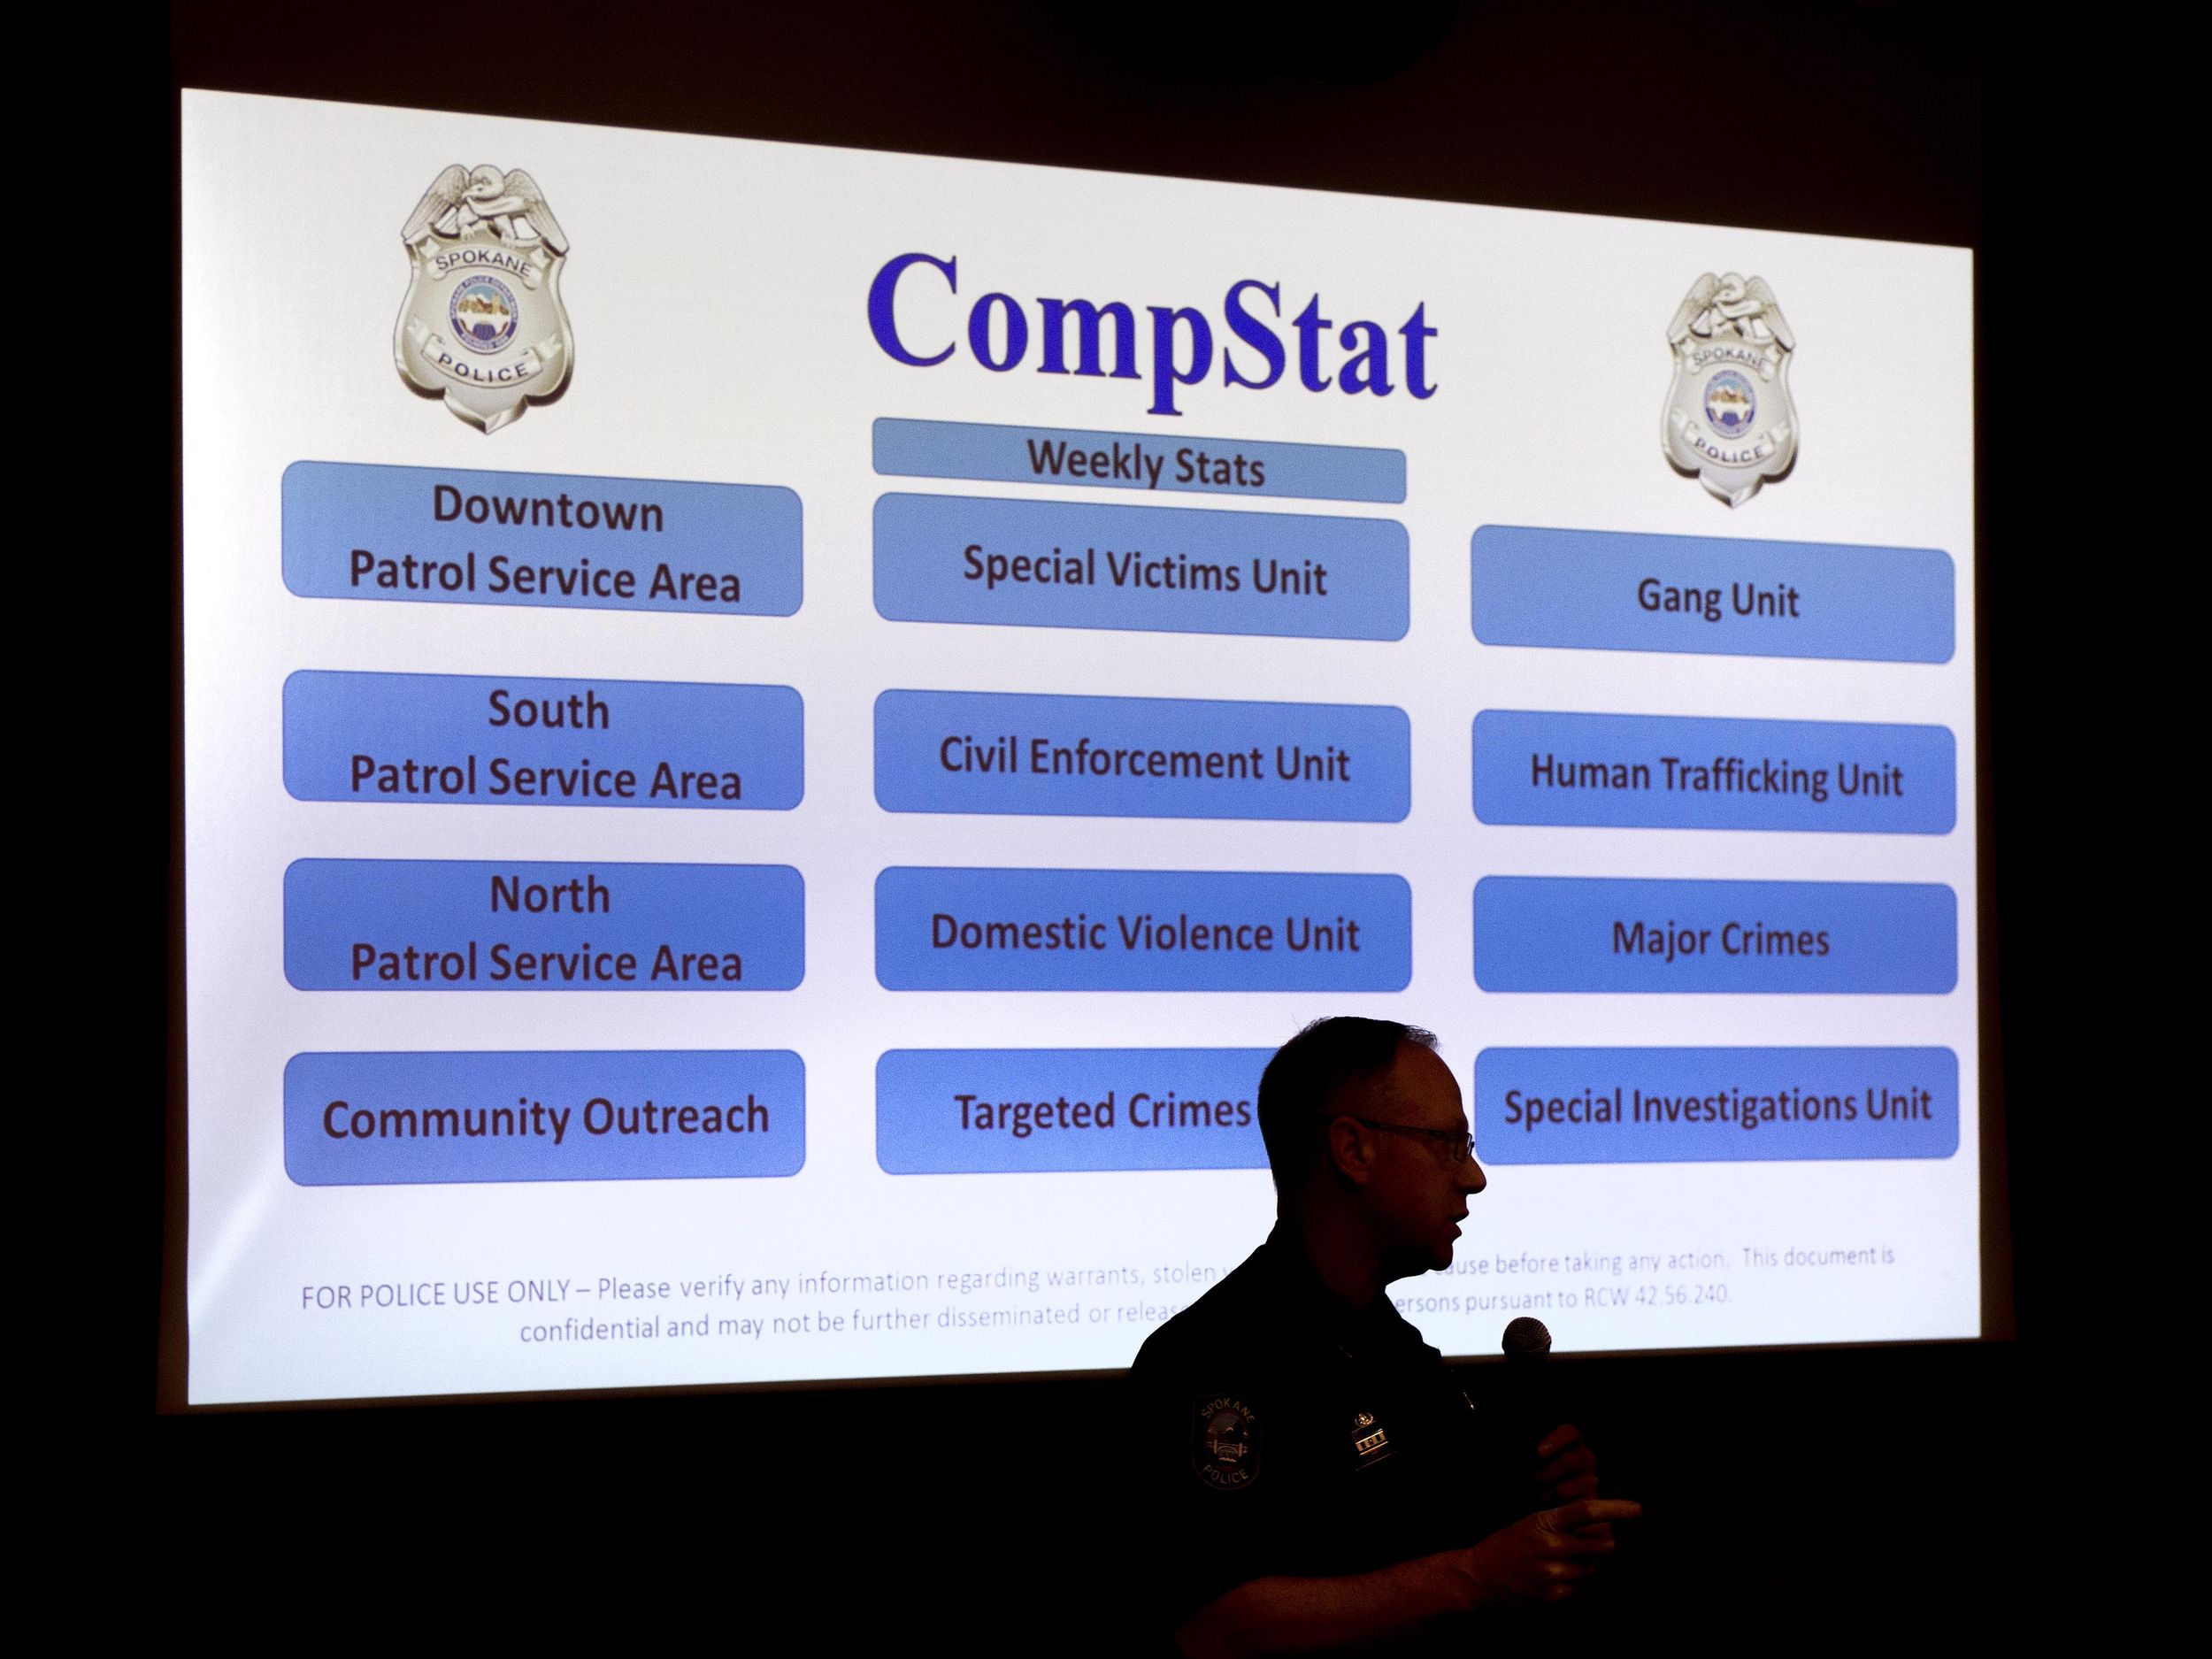 Prepare and present crime statistics for a CompStat meeting